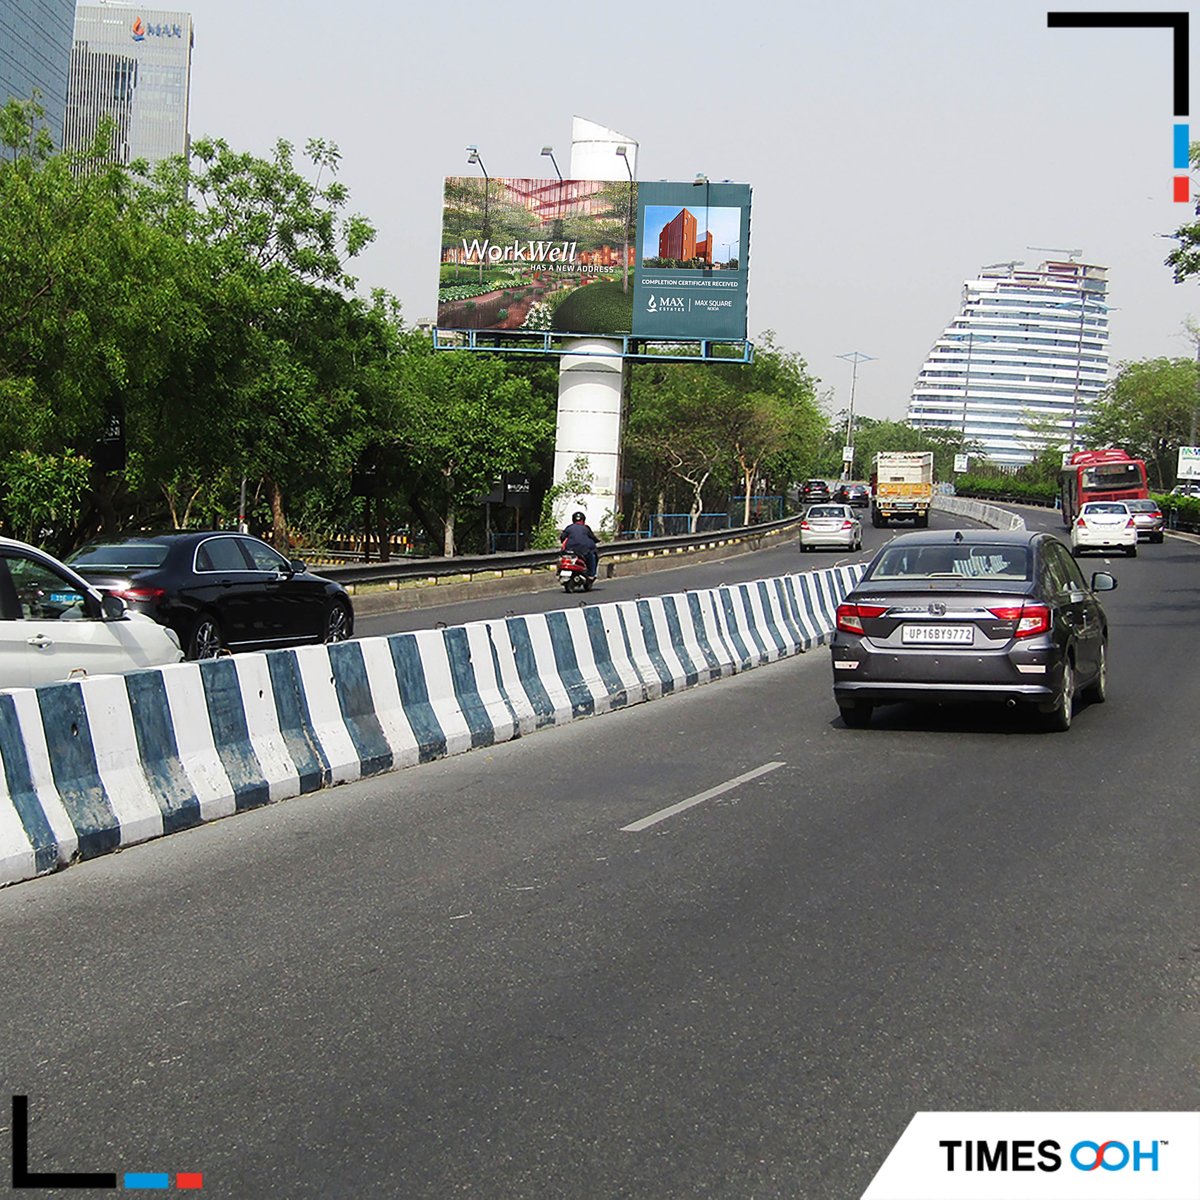 #MaxEstates implements location based strategy to promote new project #WorkWell in #DelhiNCR.

With the presence at DND Flyway, the #realestate giant targets Delhi Noida audience during peak hours.

#MaxGroup #TimesOOH #ooh #noidatollbridge #DNDFlyway #outdooradvertising